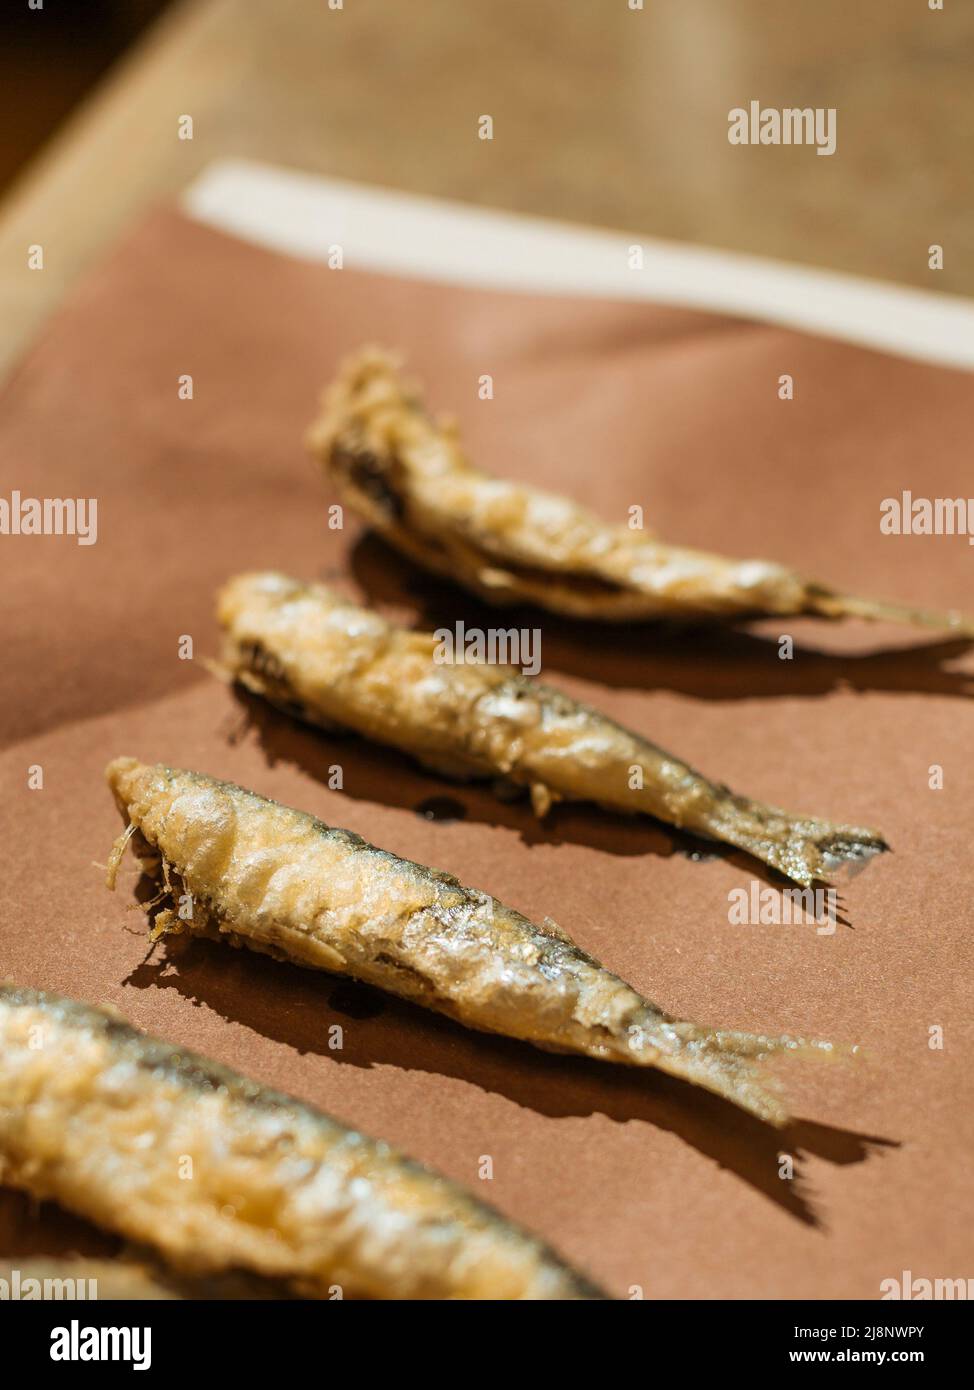 Fried pilchard (sardine) in venice, ready for serving Stock Photo